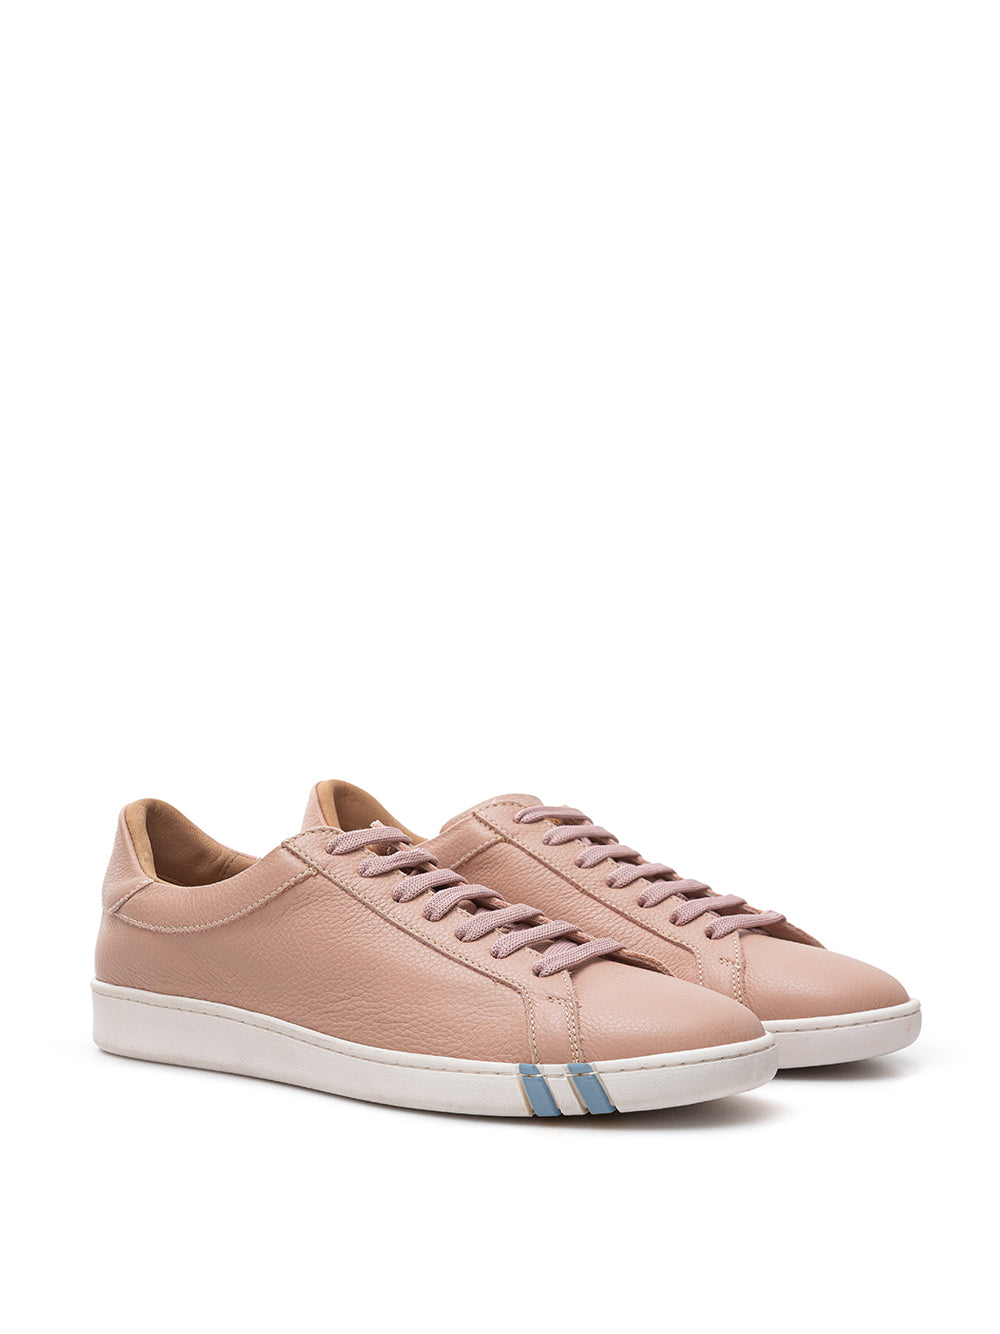 Chic Bally Pink Leather Lace-Up Sneakers